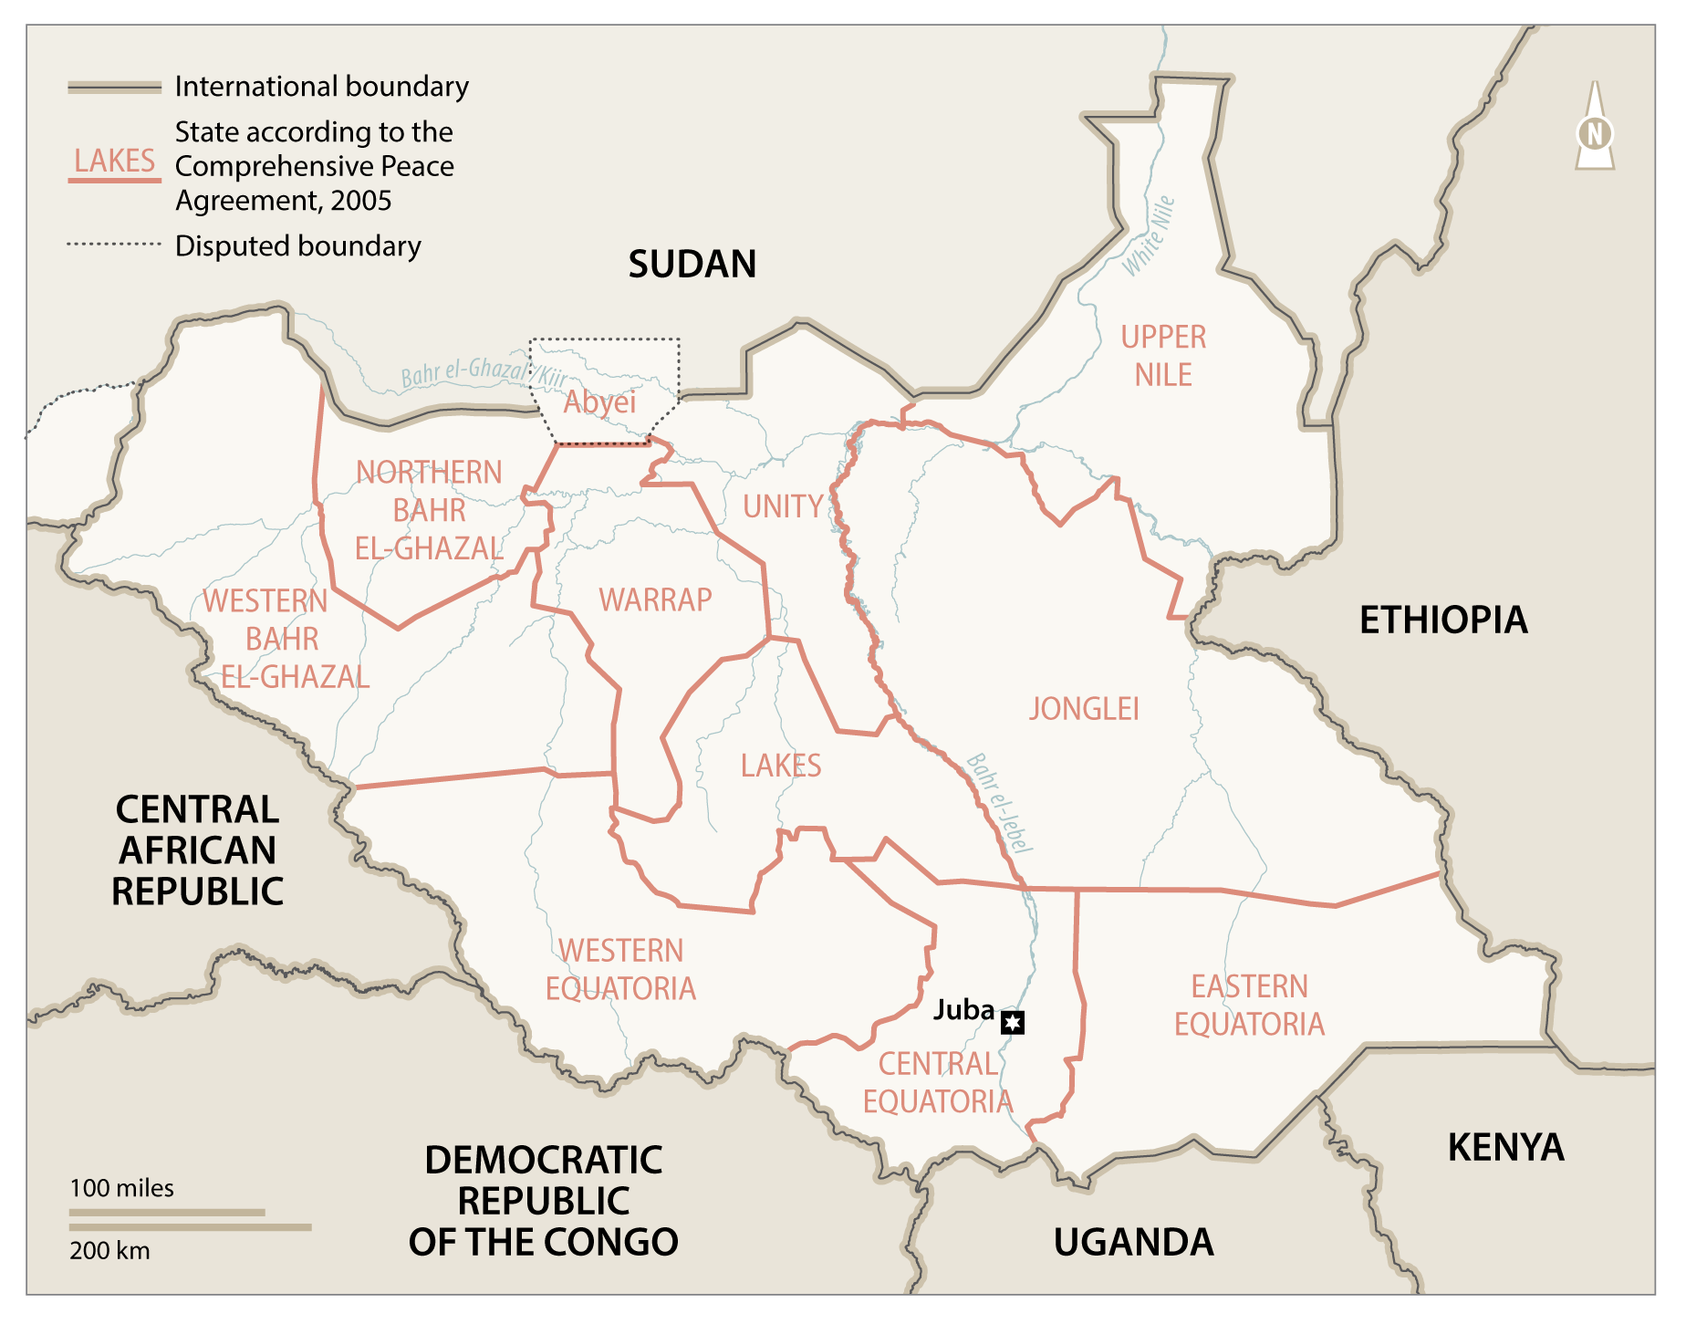 The 10 States of South Sudan (Credit: MAPgrafix 2019/OpenStreetMap)